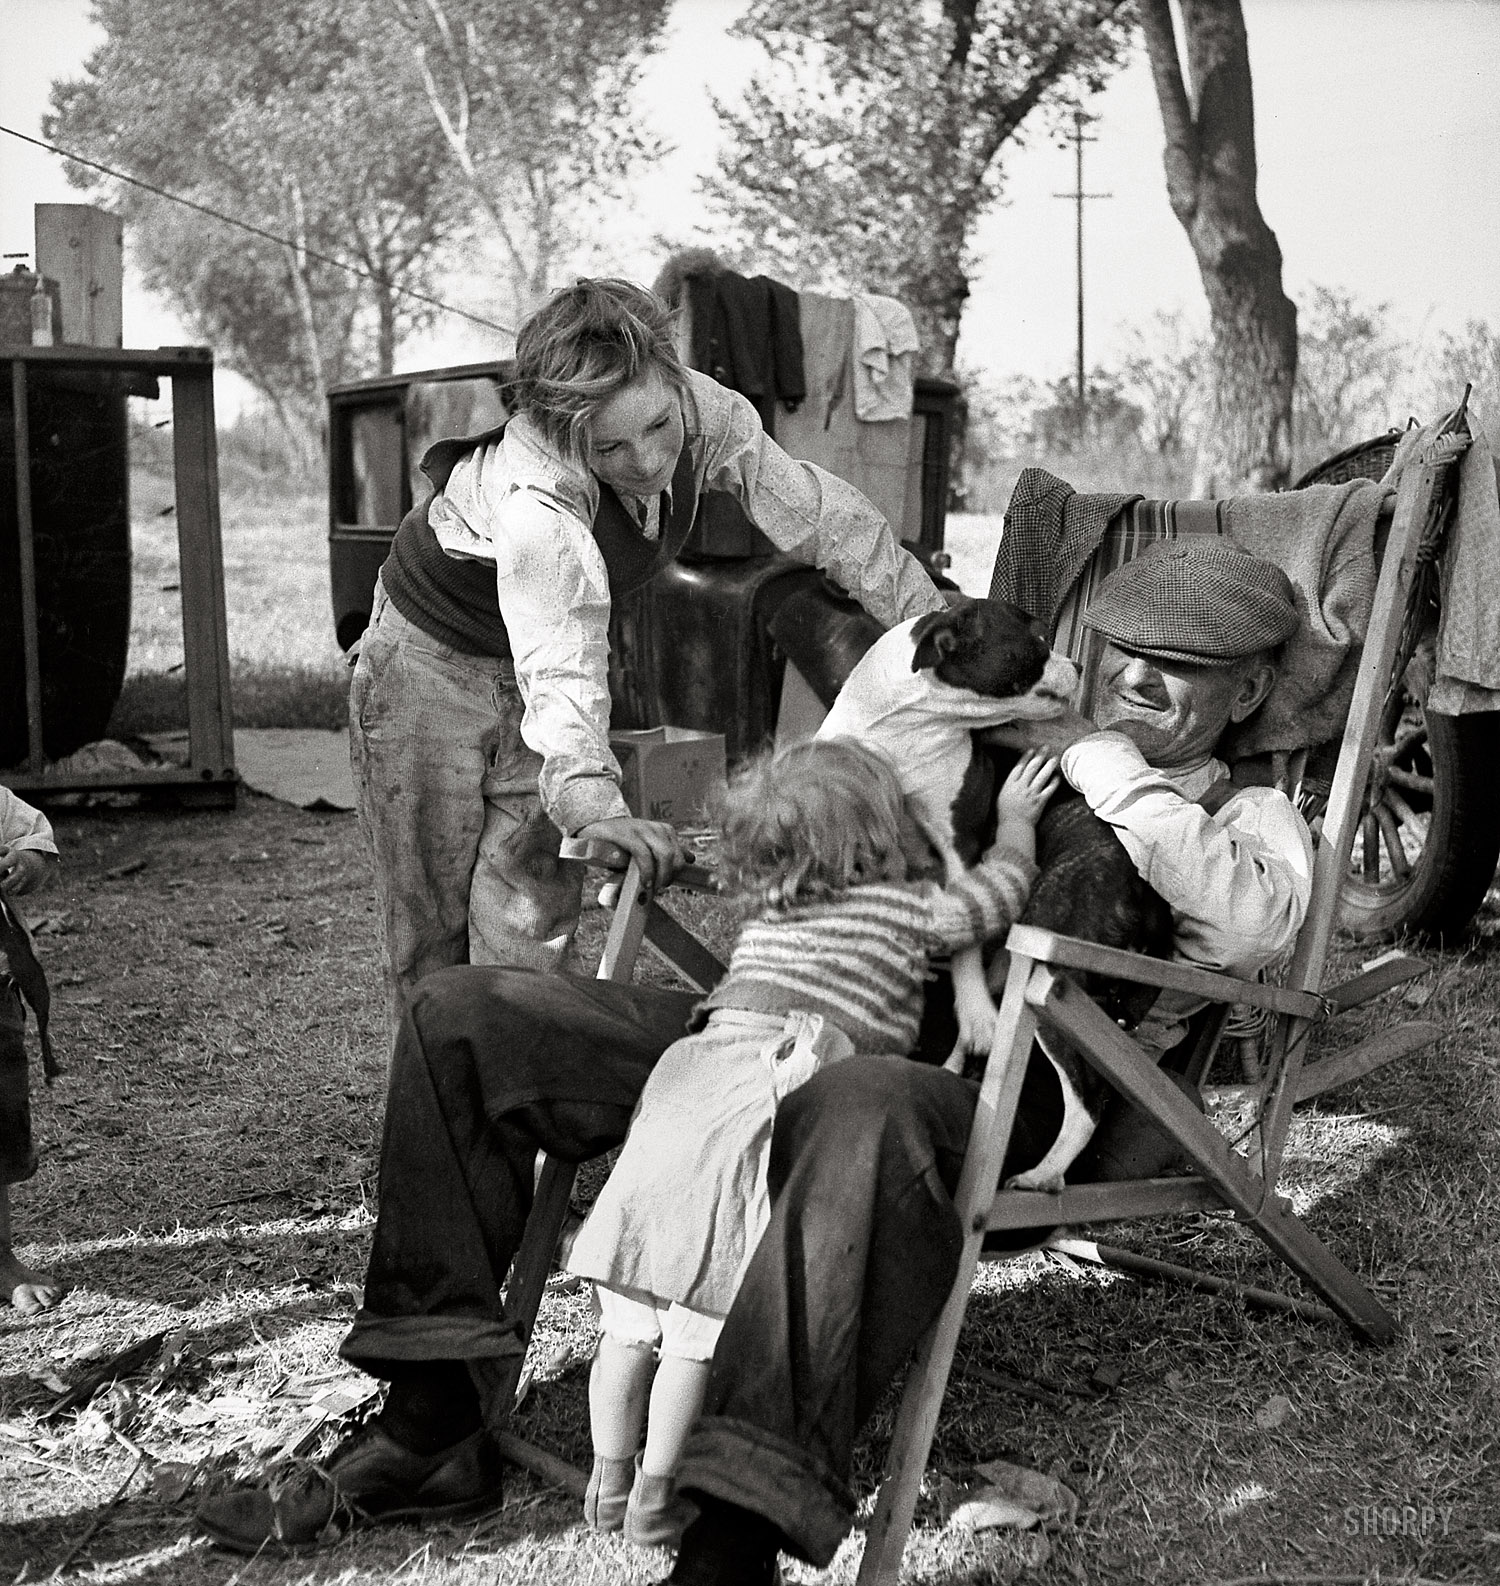 November 1936. "American River camp, Sacramento, California. Destitute family. Five children, aged two to seventeen years." Medium-format nitrate negative by Dorothea Lange for the Resettlement Administration. View full size.